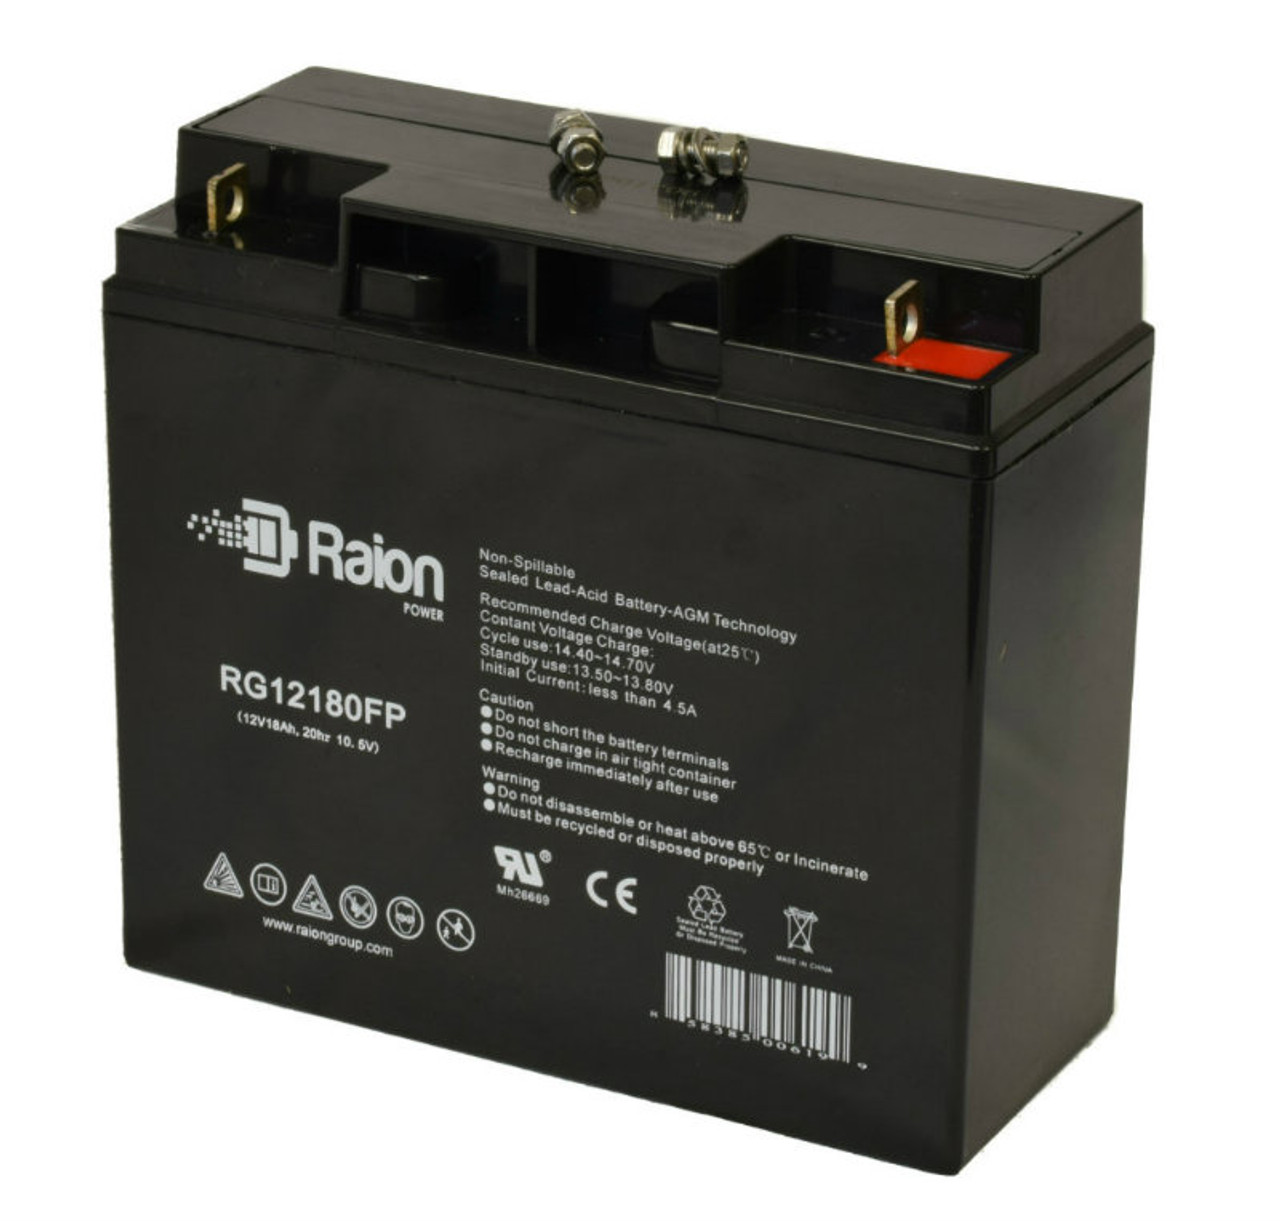 Raion Power Replacement 12V 18Ah Battery for Palma PM20-12 - 1 Pack